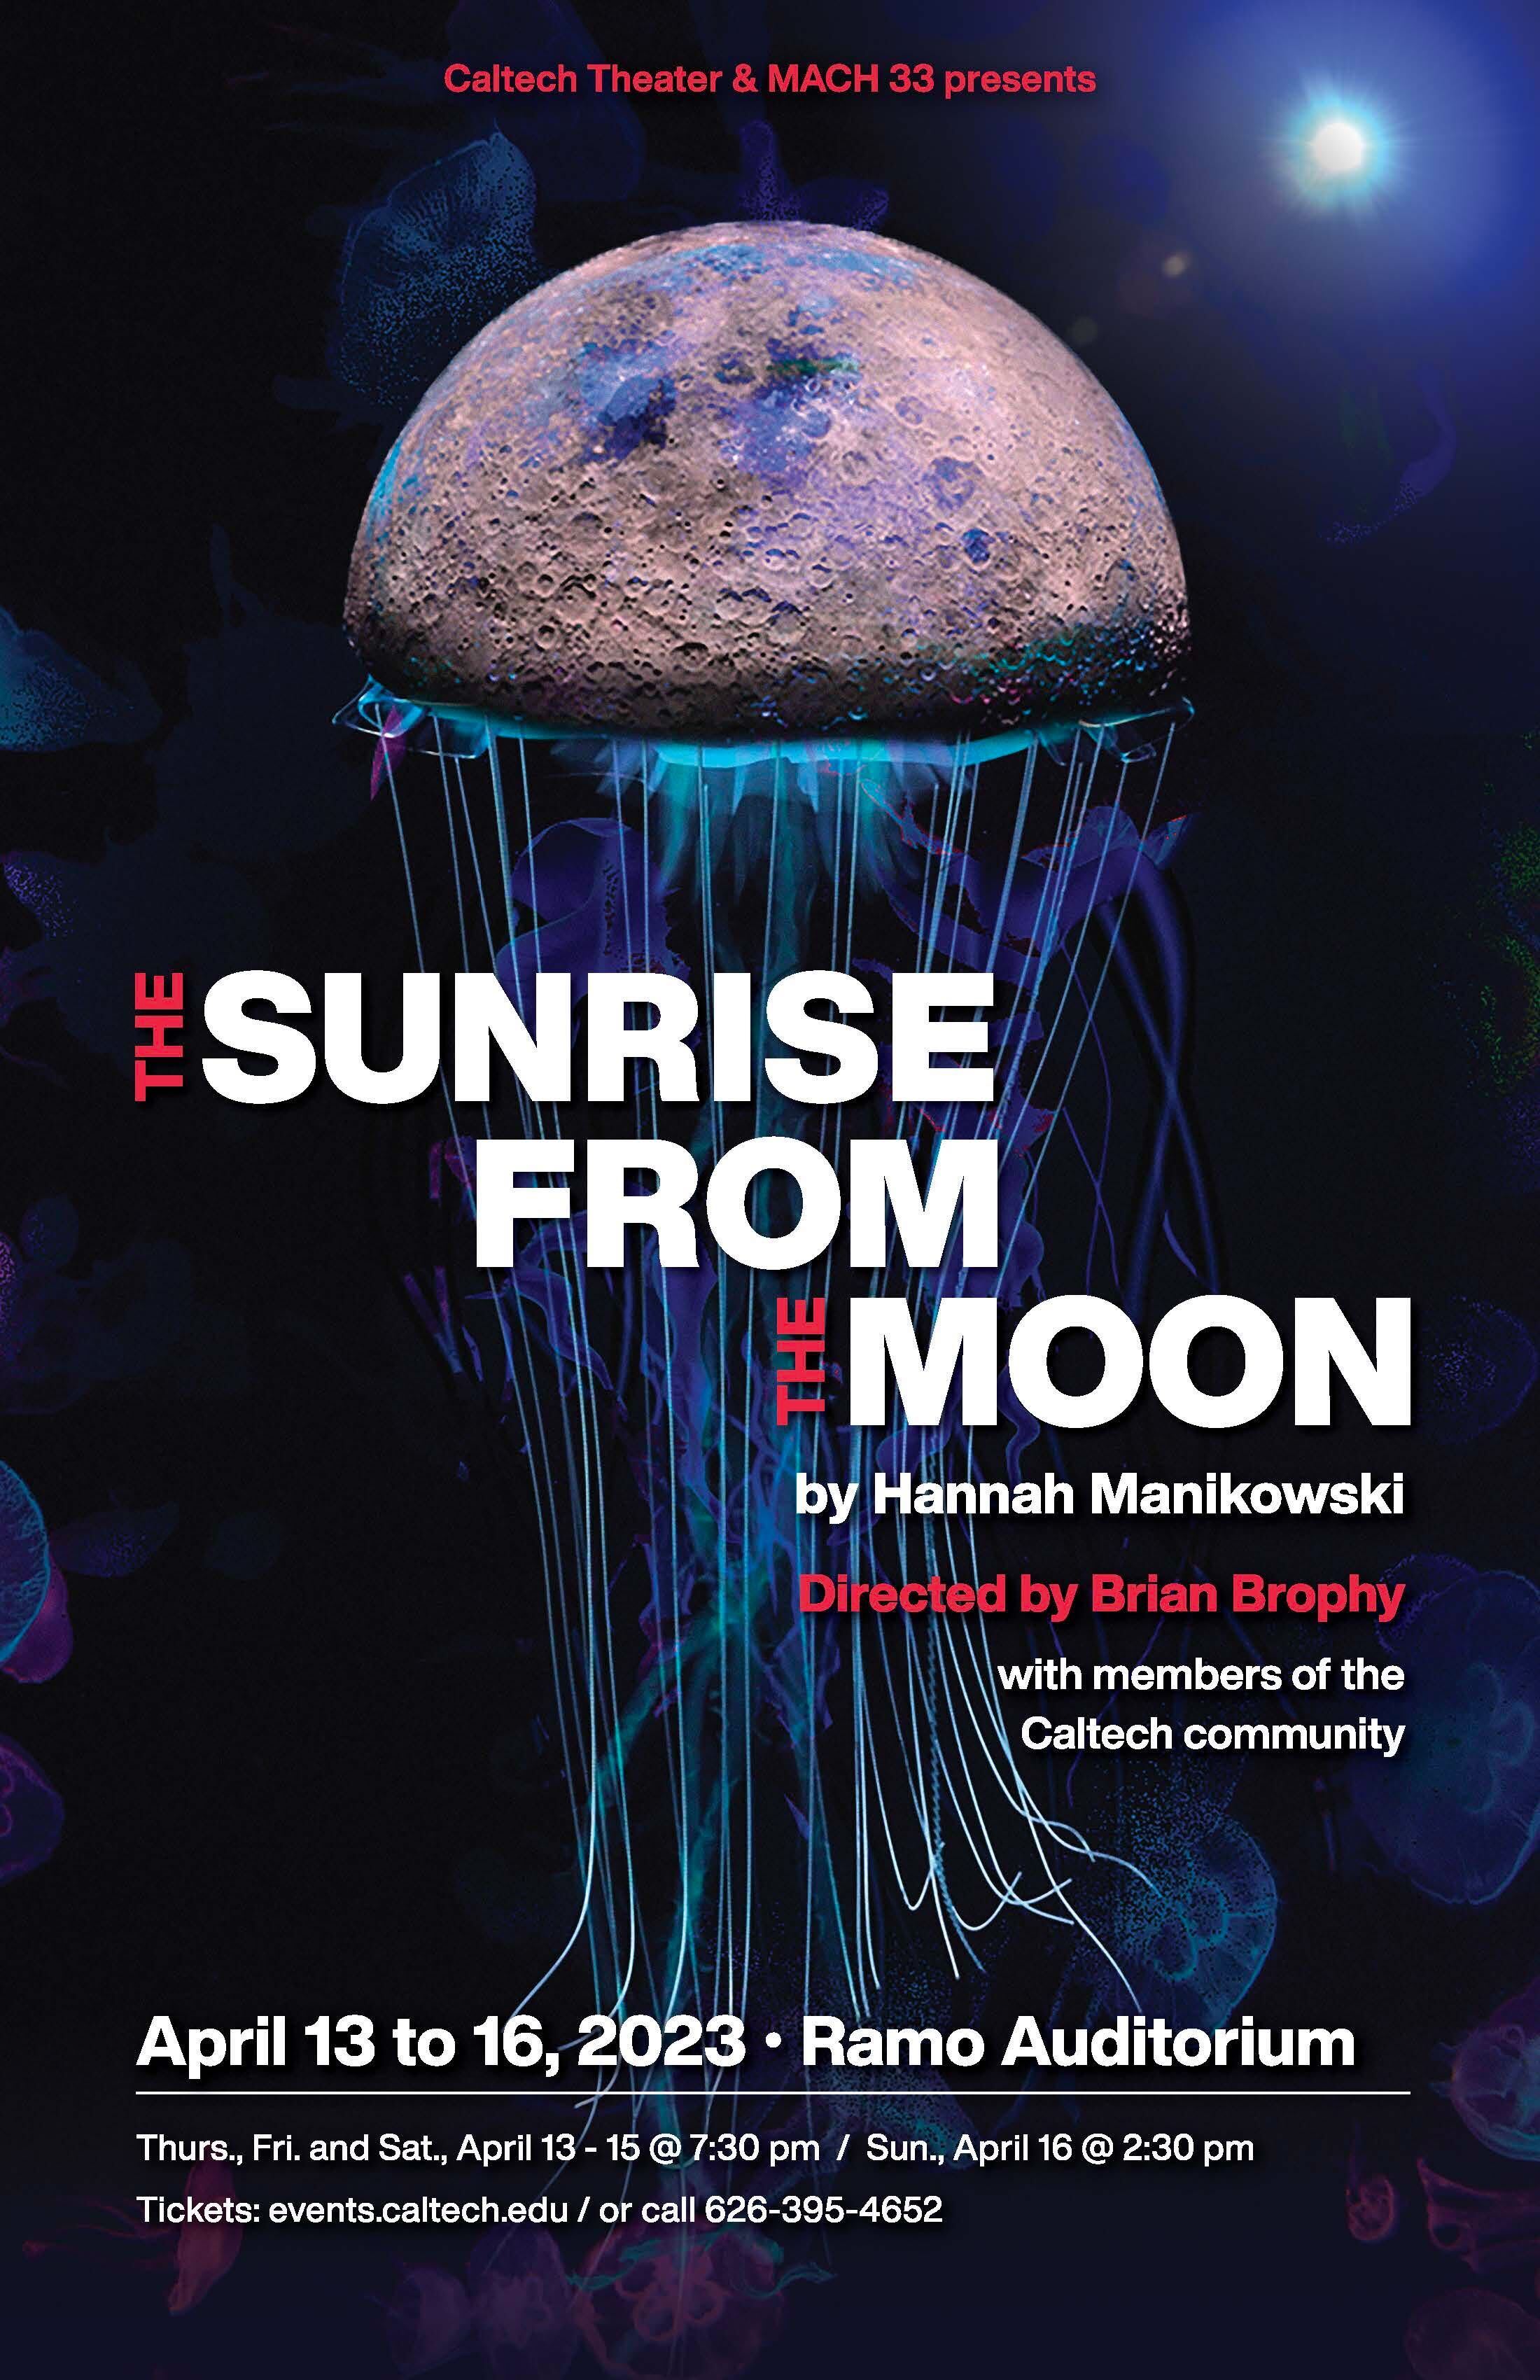 Caltech Theater & MACH 33 Presents: The Sunrise From The Moon